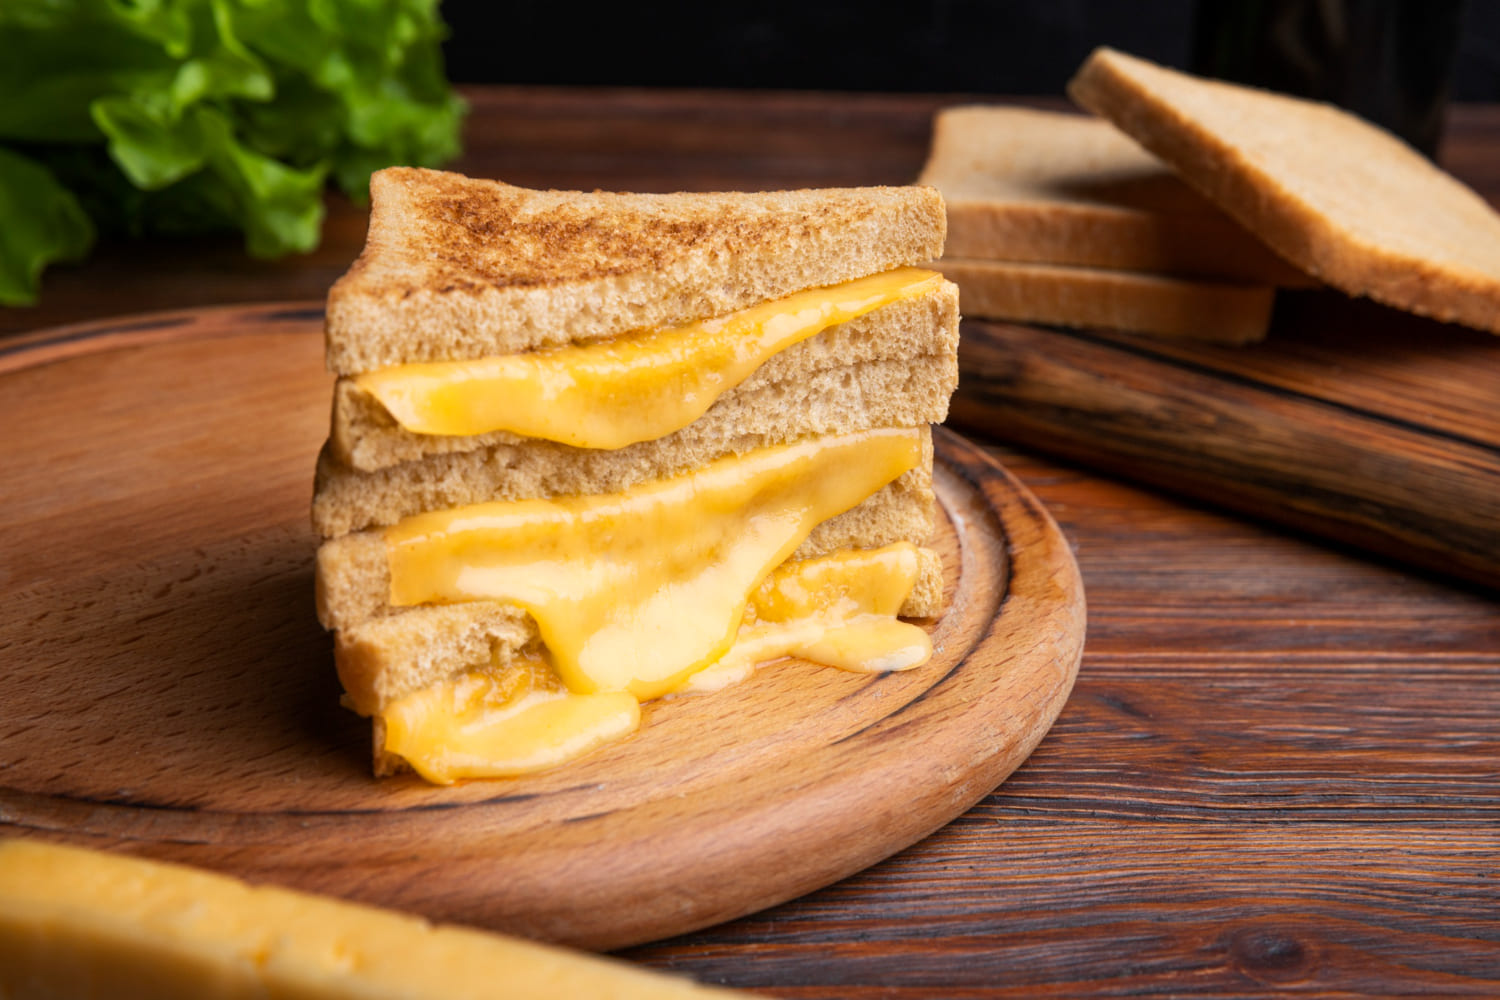 How to make a grilled cheese